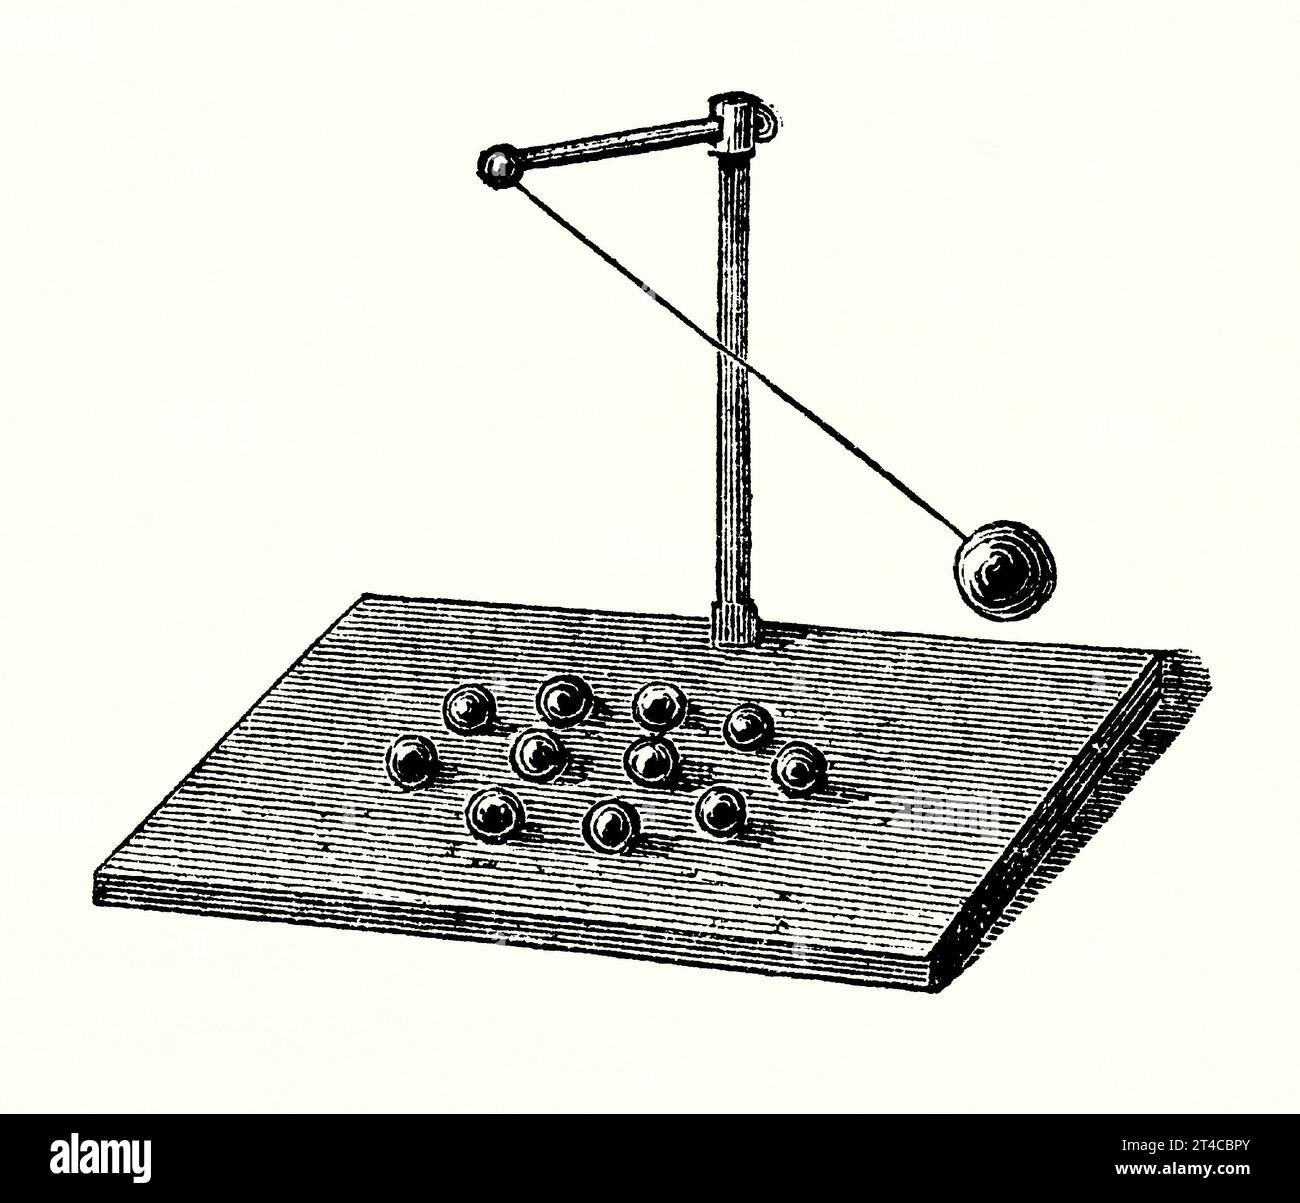 An old engraving of the table game of Cupolette. It is from Victorian book of the 1890s on sports, games and pastimes. This was a skittle-like game where balls are held in 11 sunken, numbered cups in the centre of the board. A heavier ball, on a swinging arm, is swung by each player, the aim being to dislodge the small balls from their cups. The balls must stay on the board to score points. There was an outdoor version of the game with fixed pins (each with a small hollow at the top containing a marble). Each player threw quoits to try and dislodge the marbles. Stock Photo